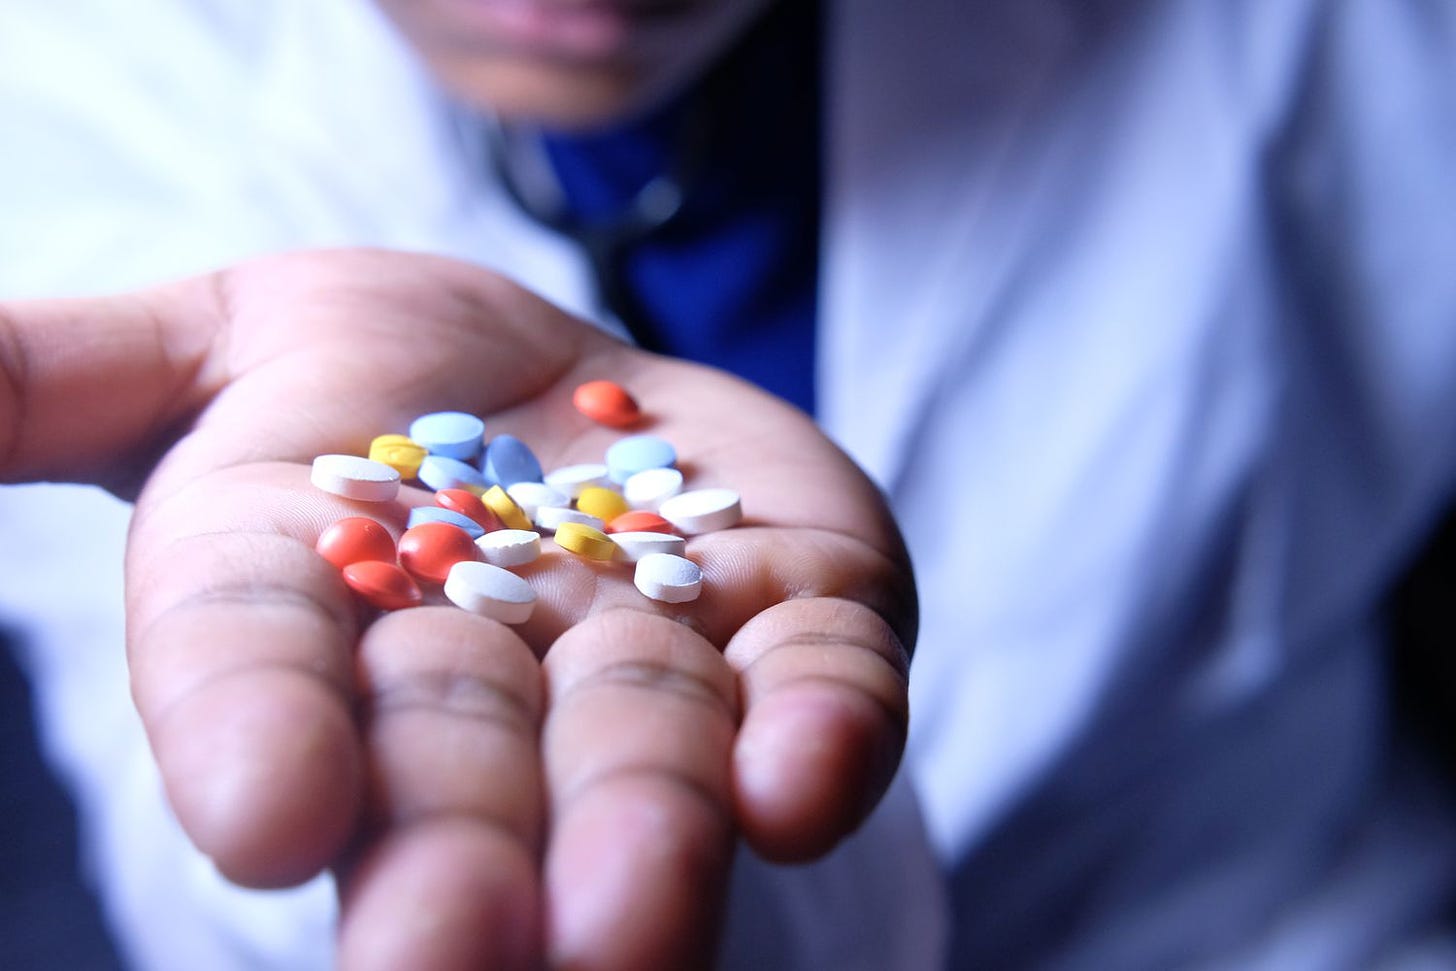 Common Antidepressant Medications: Types, Side Effects, and Effectiveness